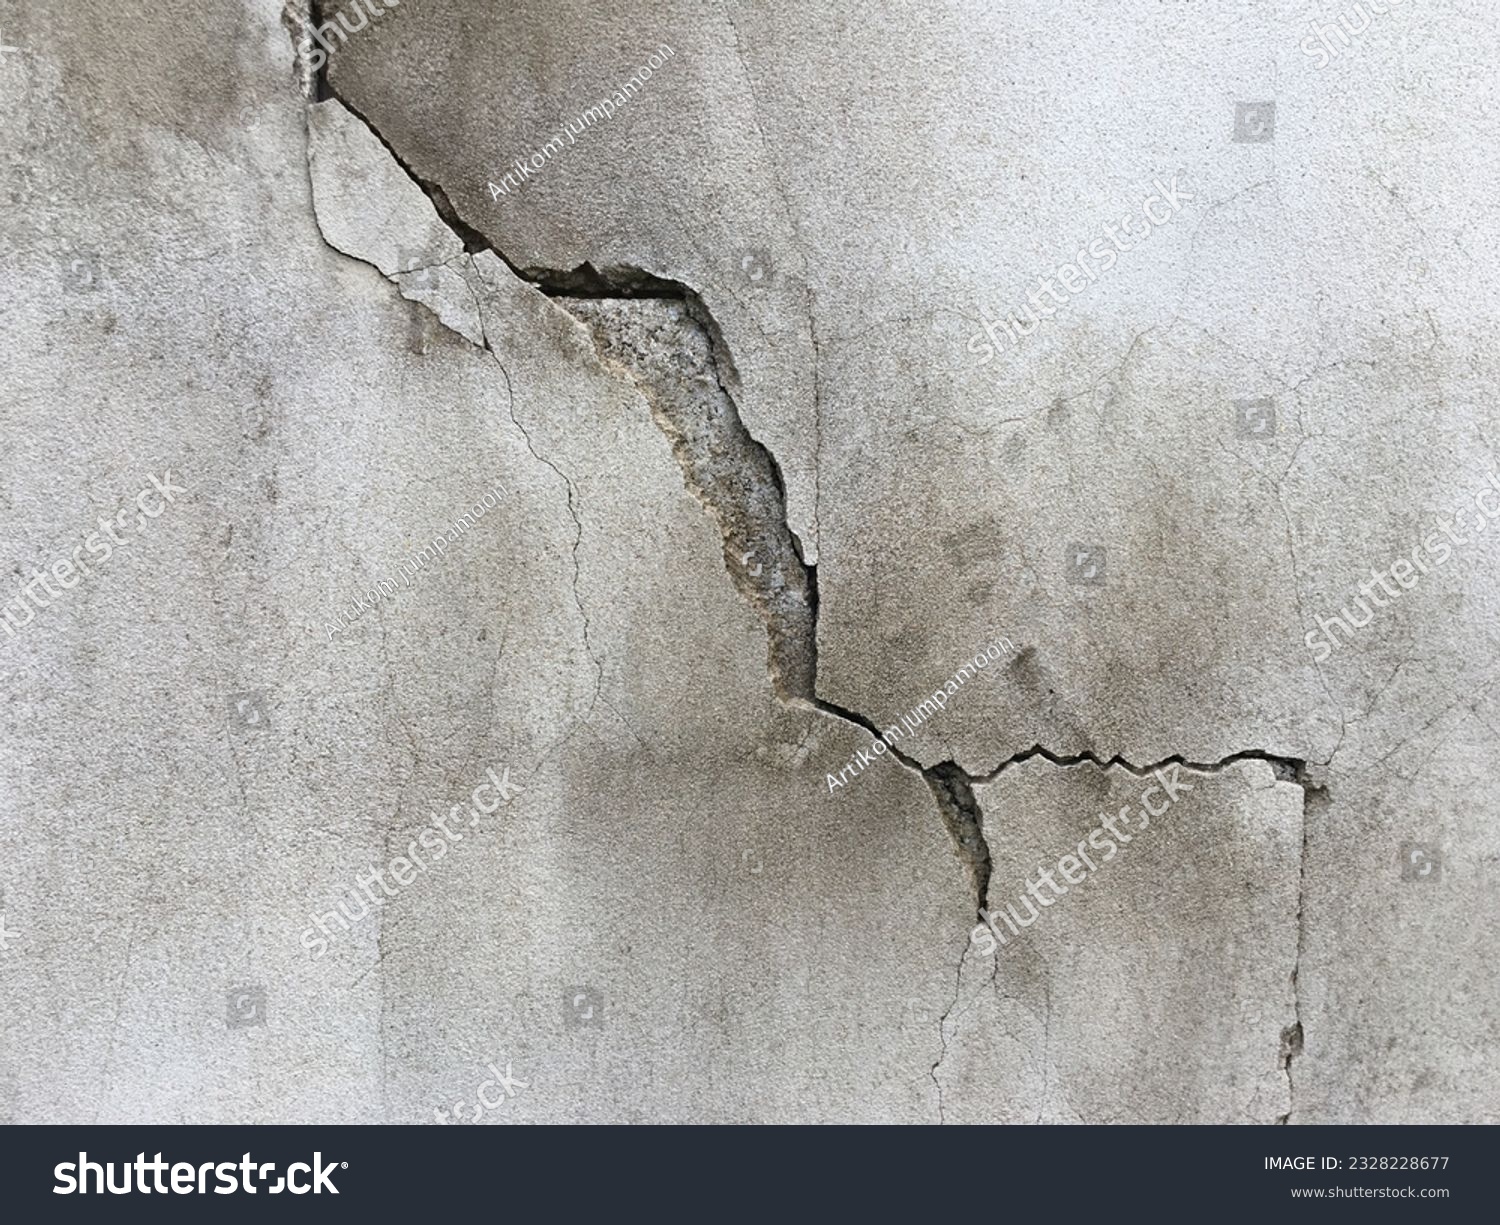 Close-up of cracked concrete wall. Cracked concrete should be fixed. #2328228677